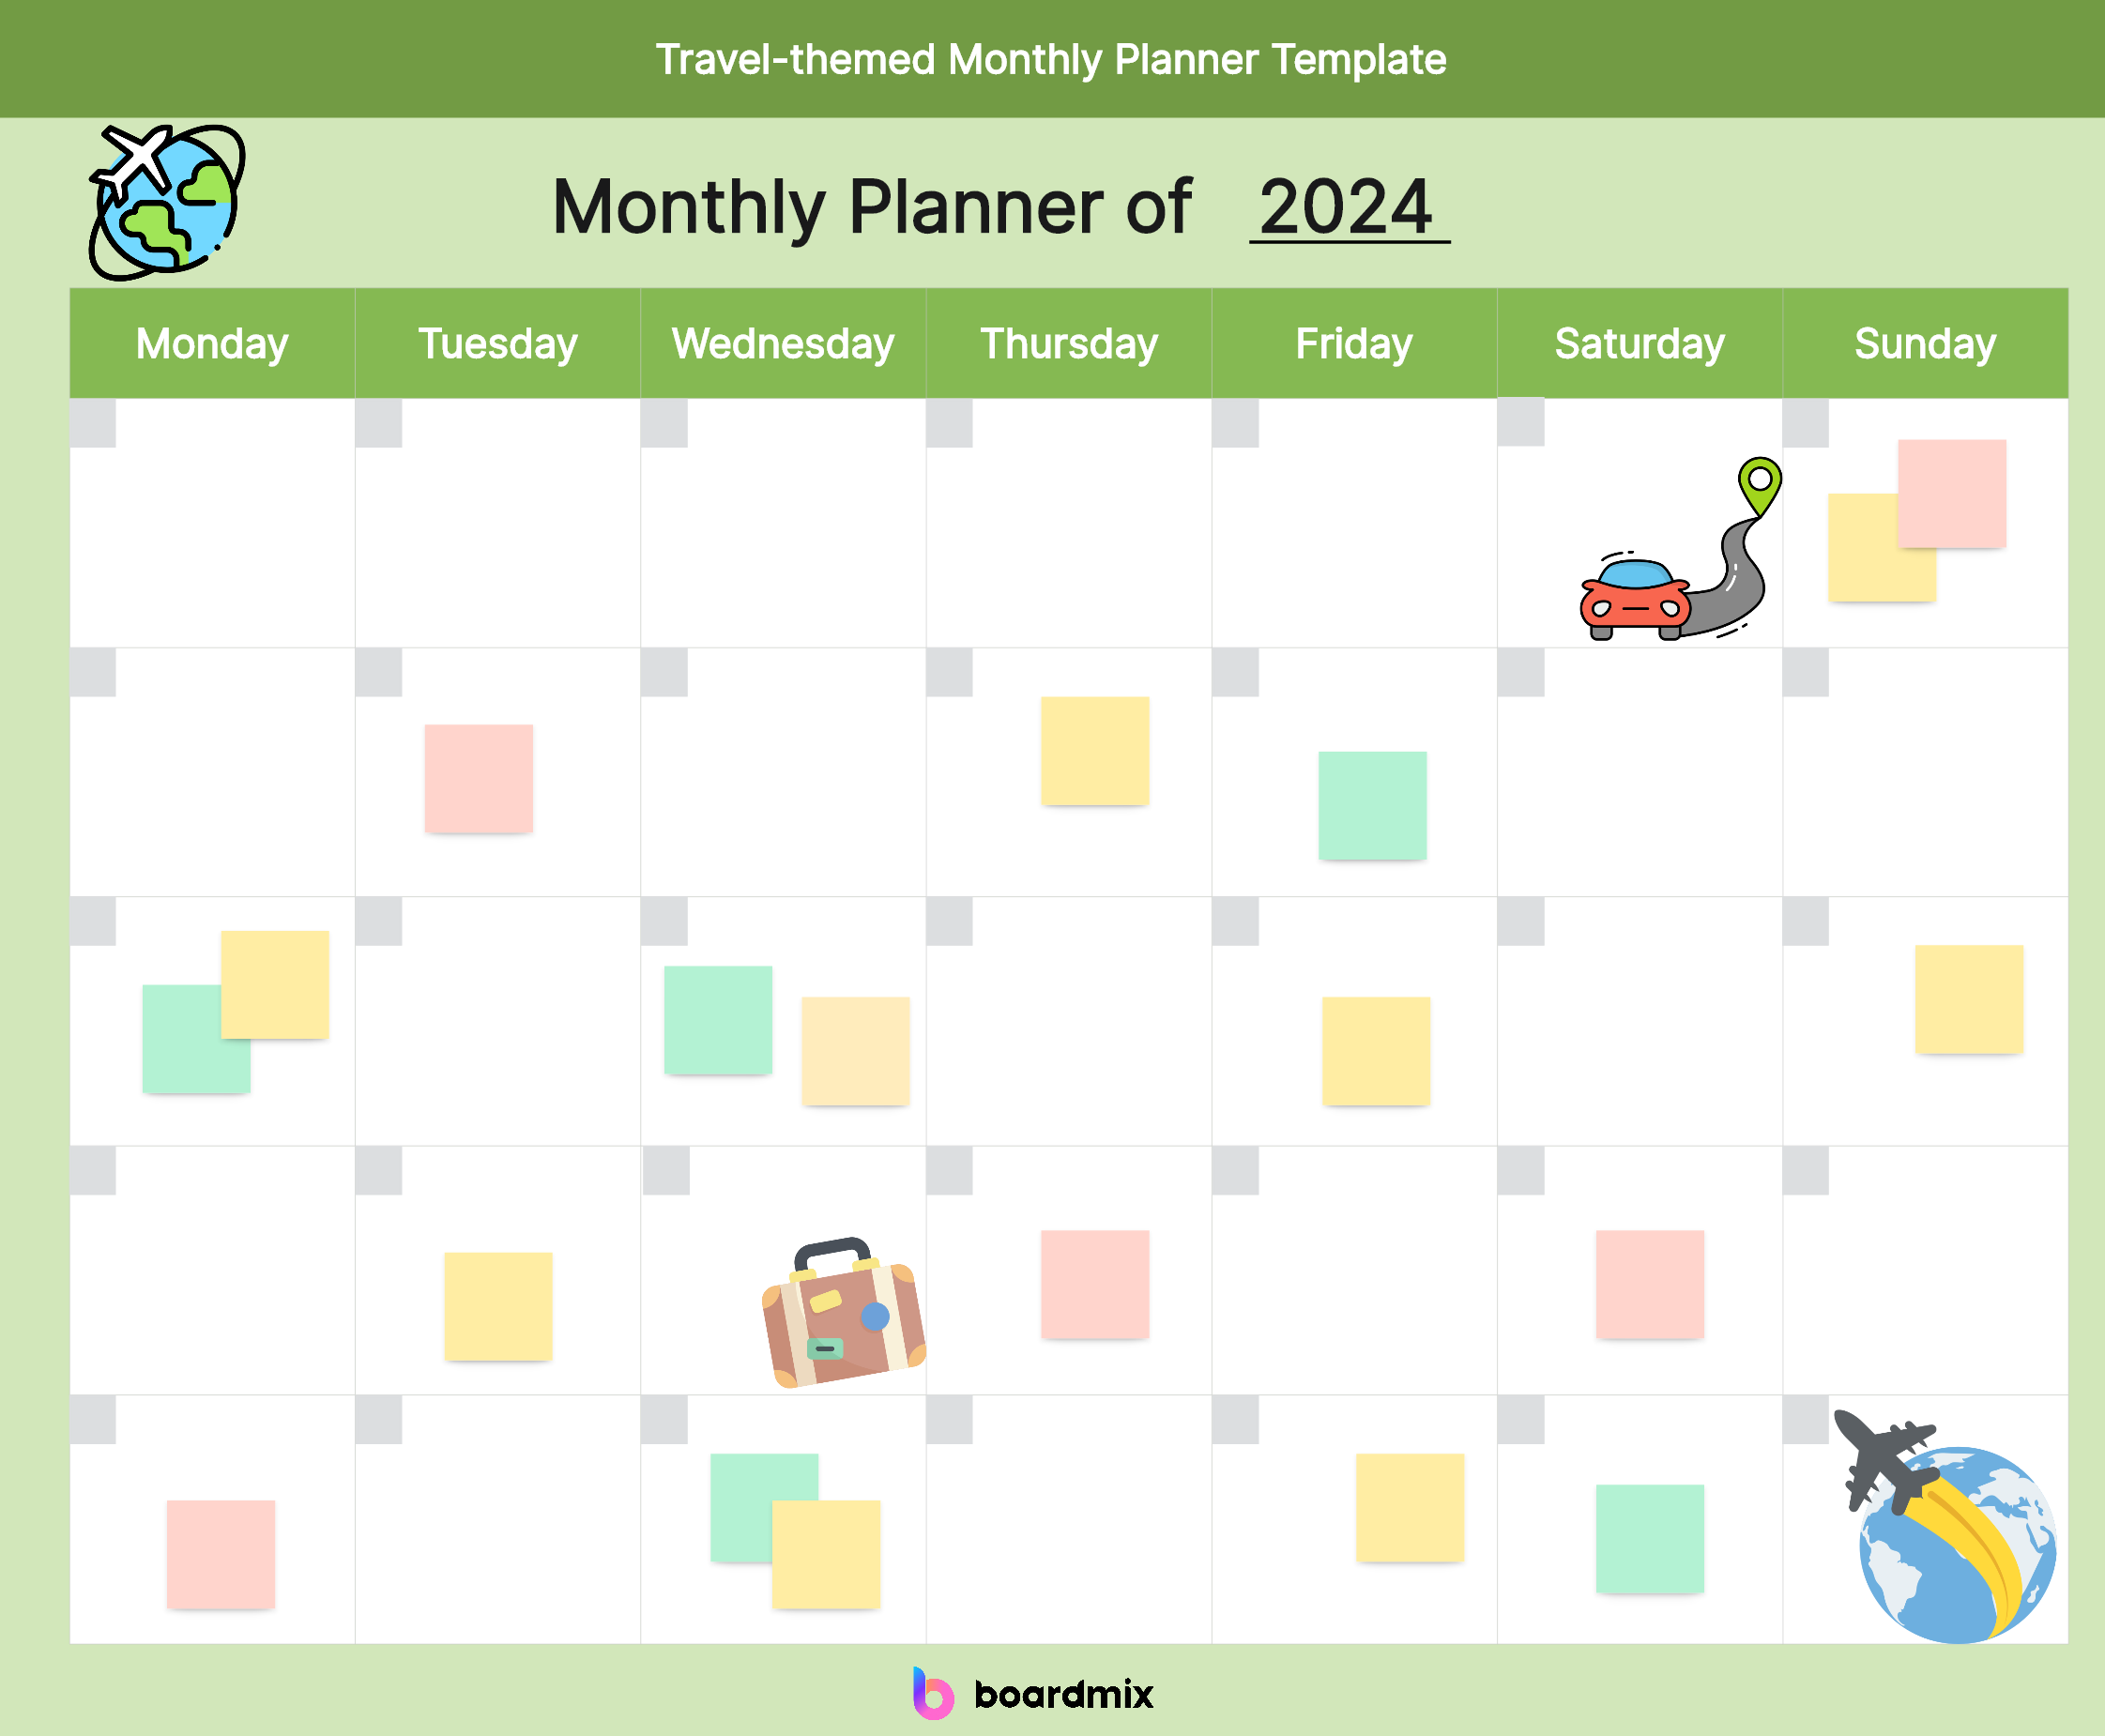 travel-themed-monthly-planner-template.png